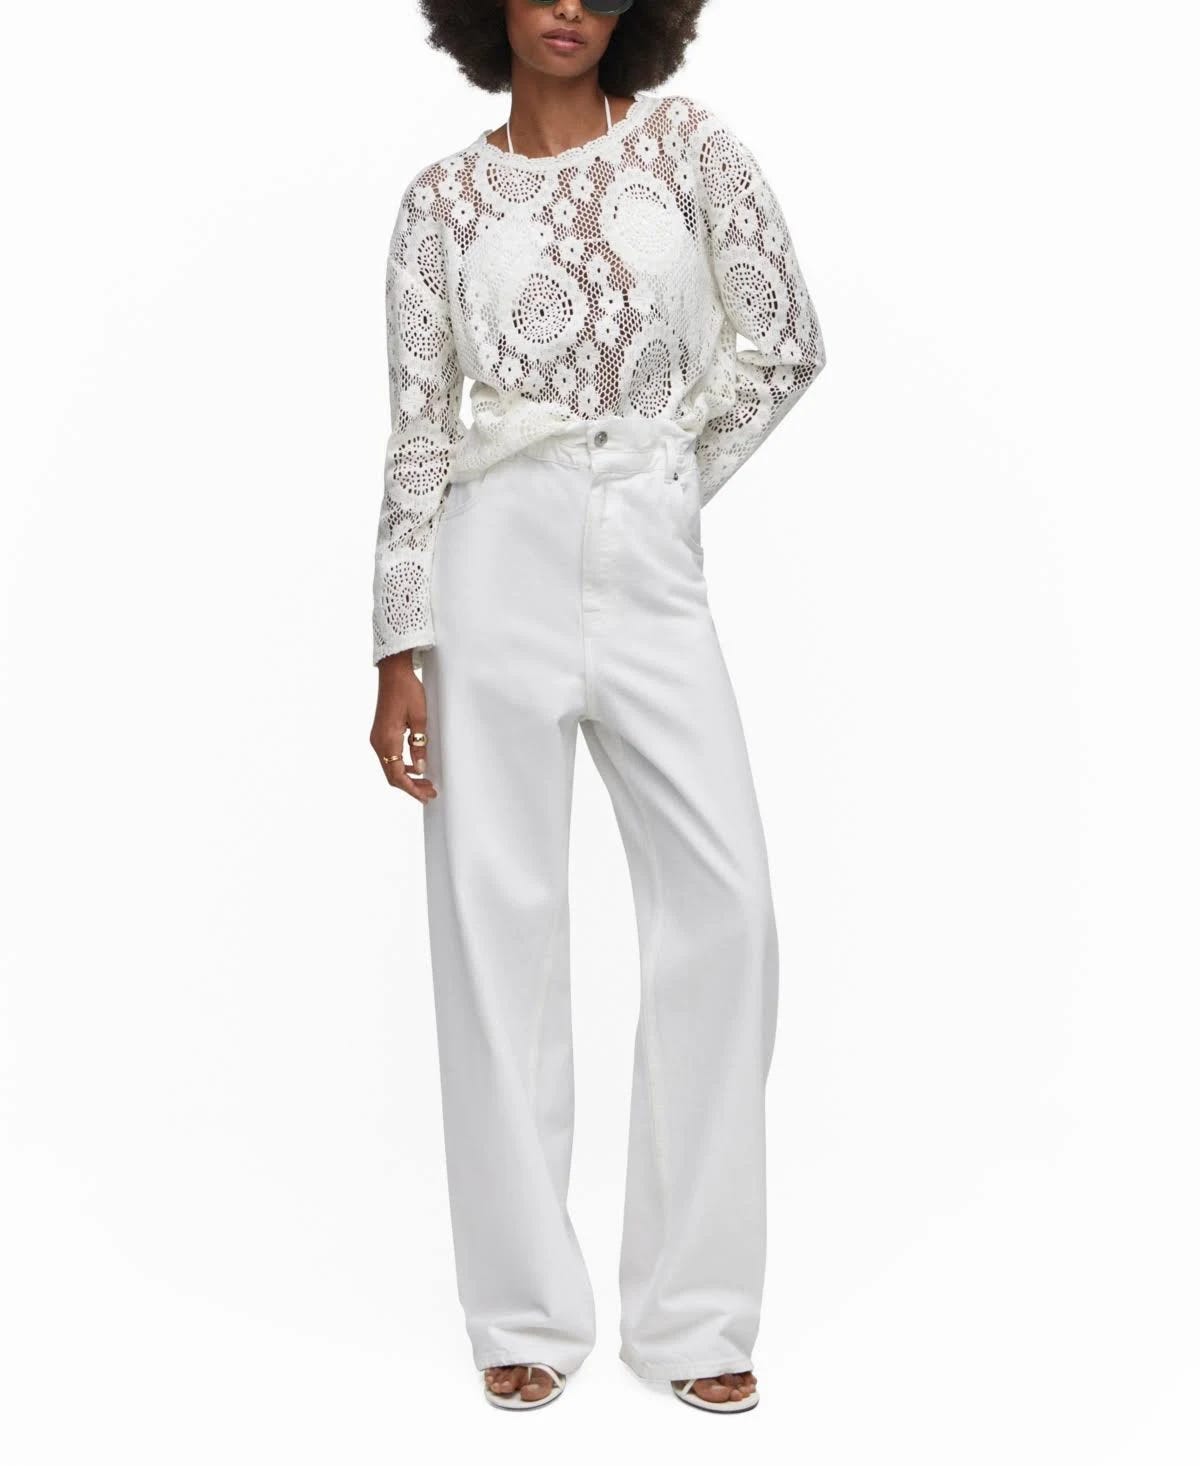 Affordable White Jeans with Elastic Waist and Wide Leg Cut | Image